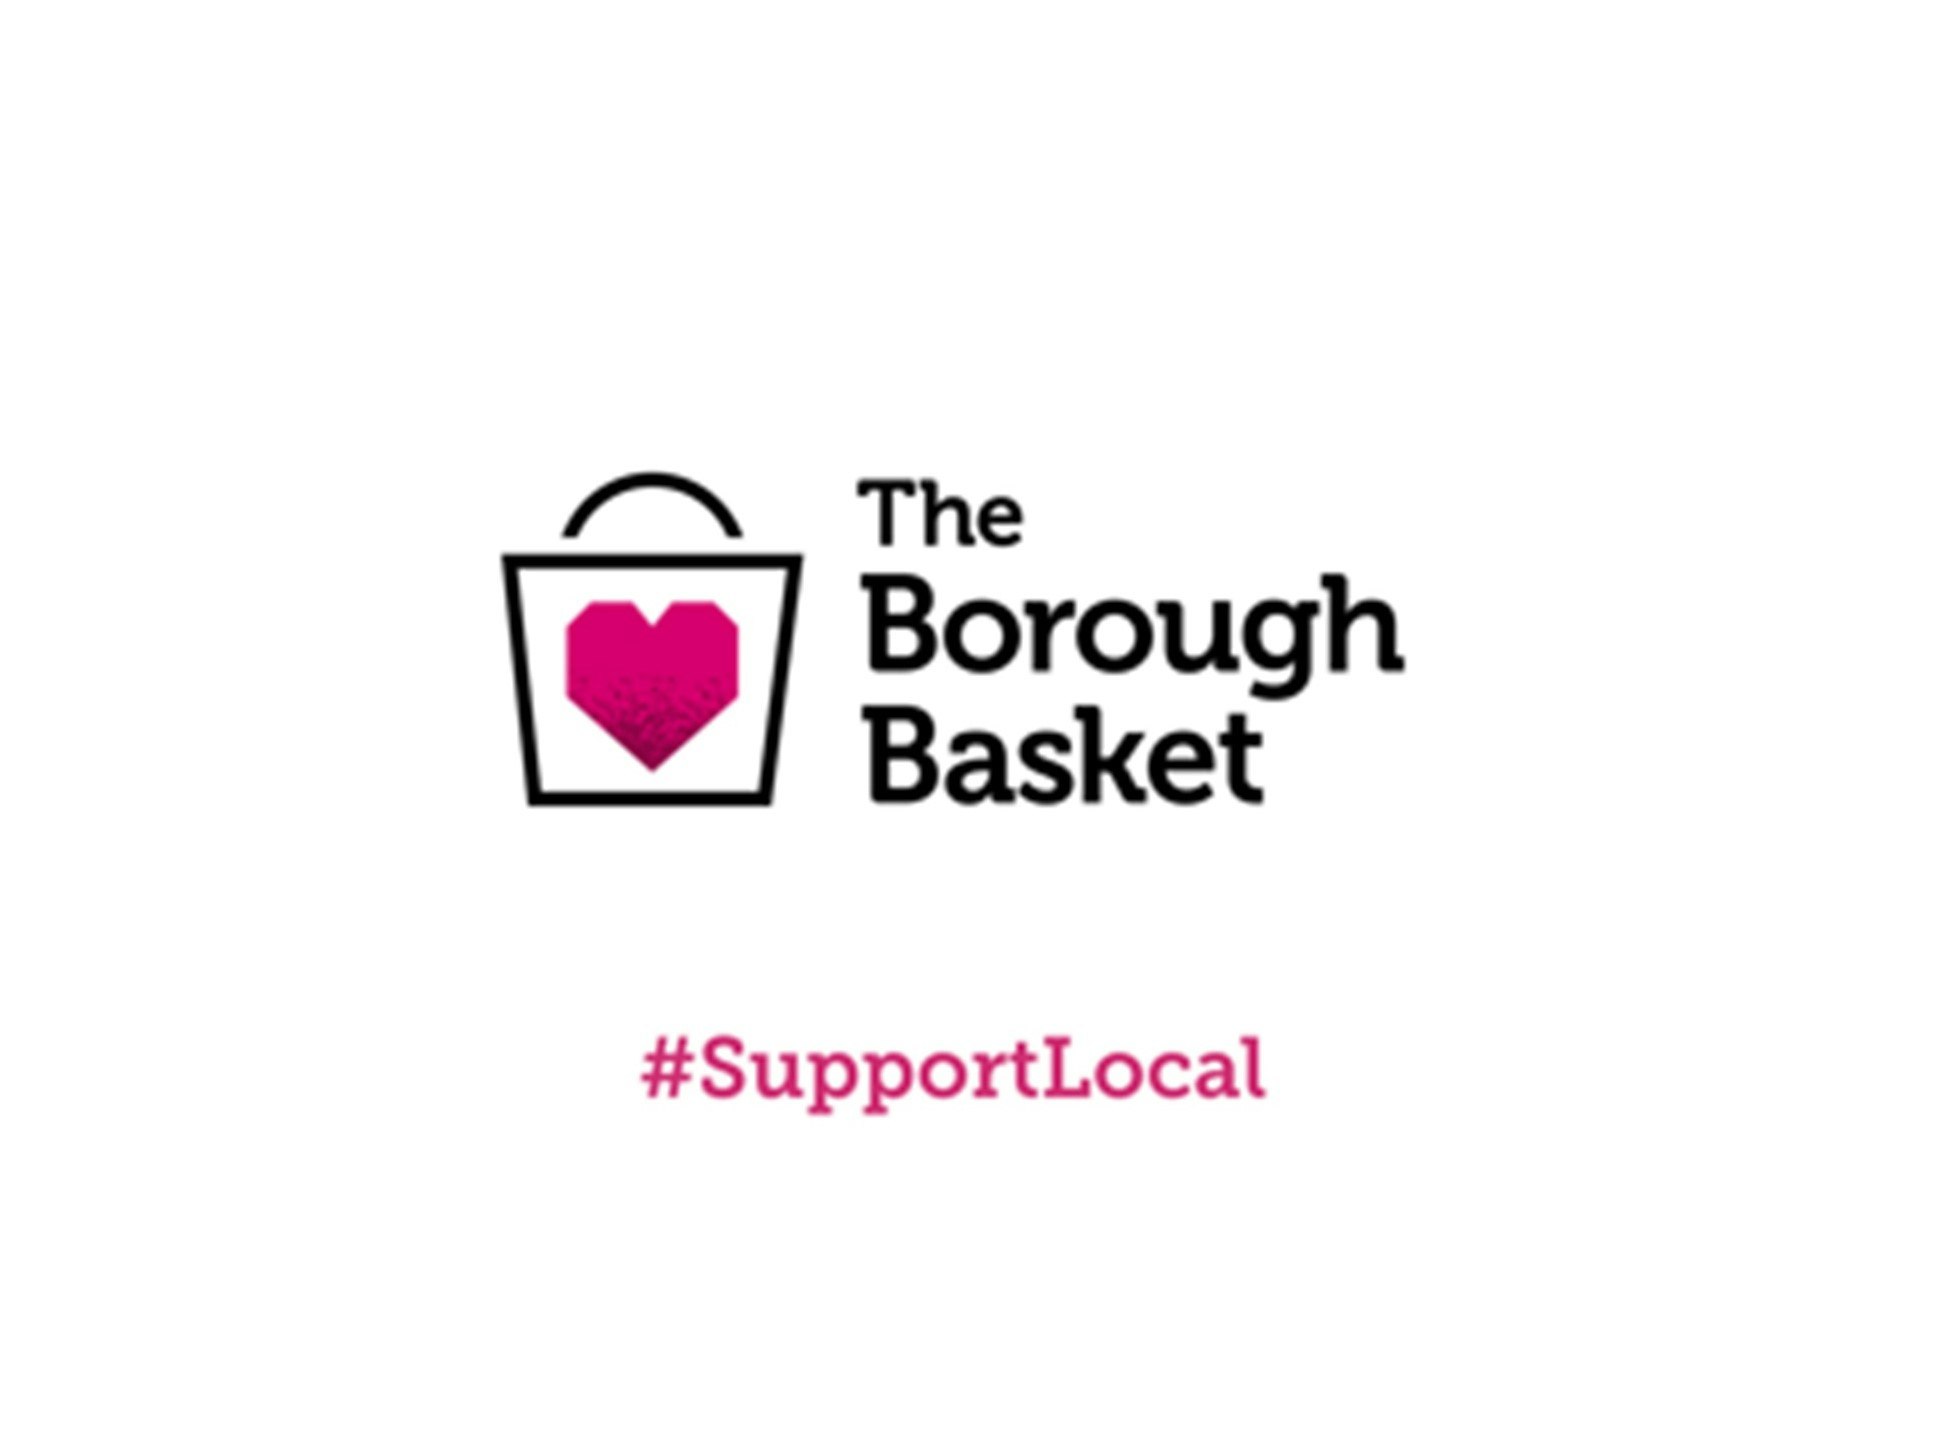 The Borough Basket #SupportLocal